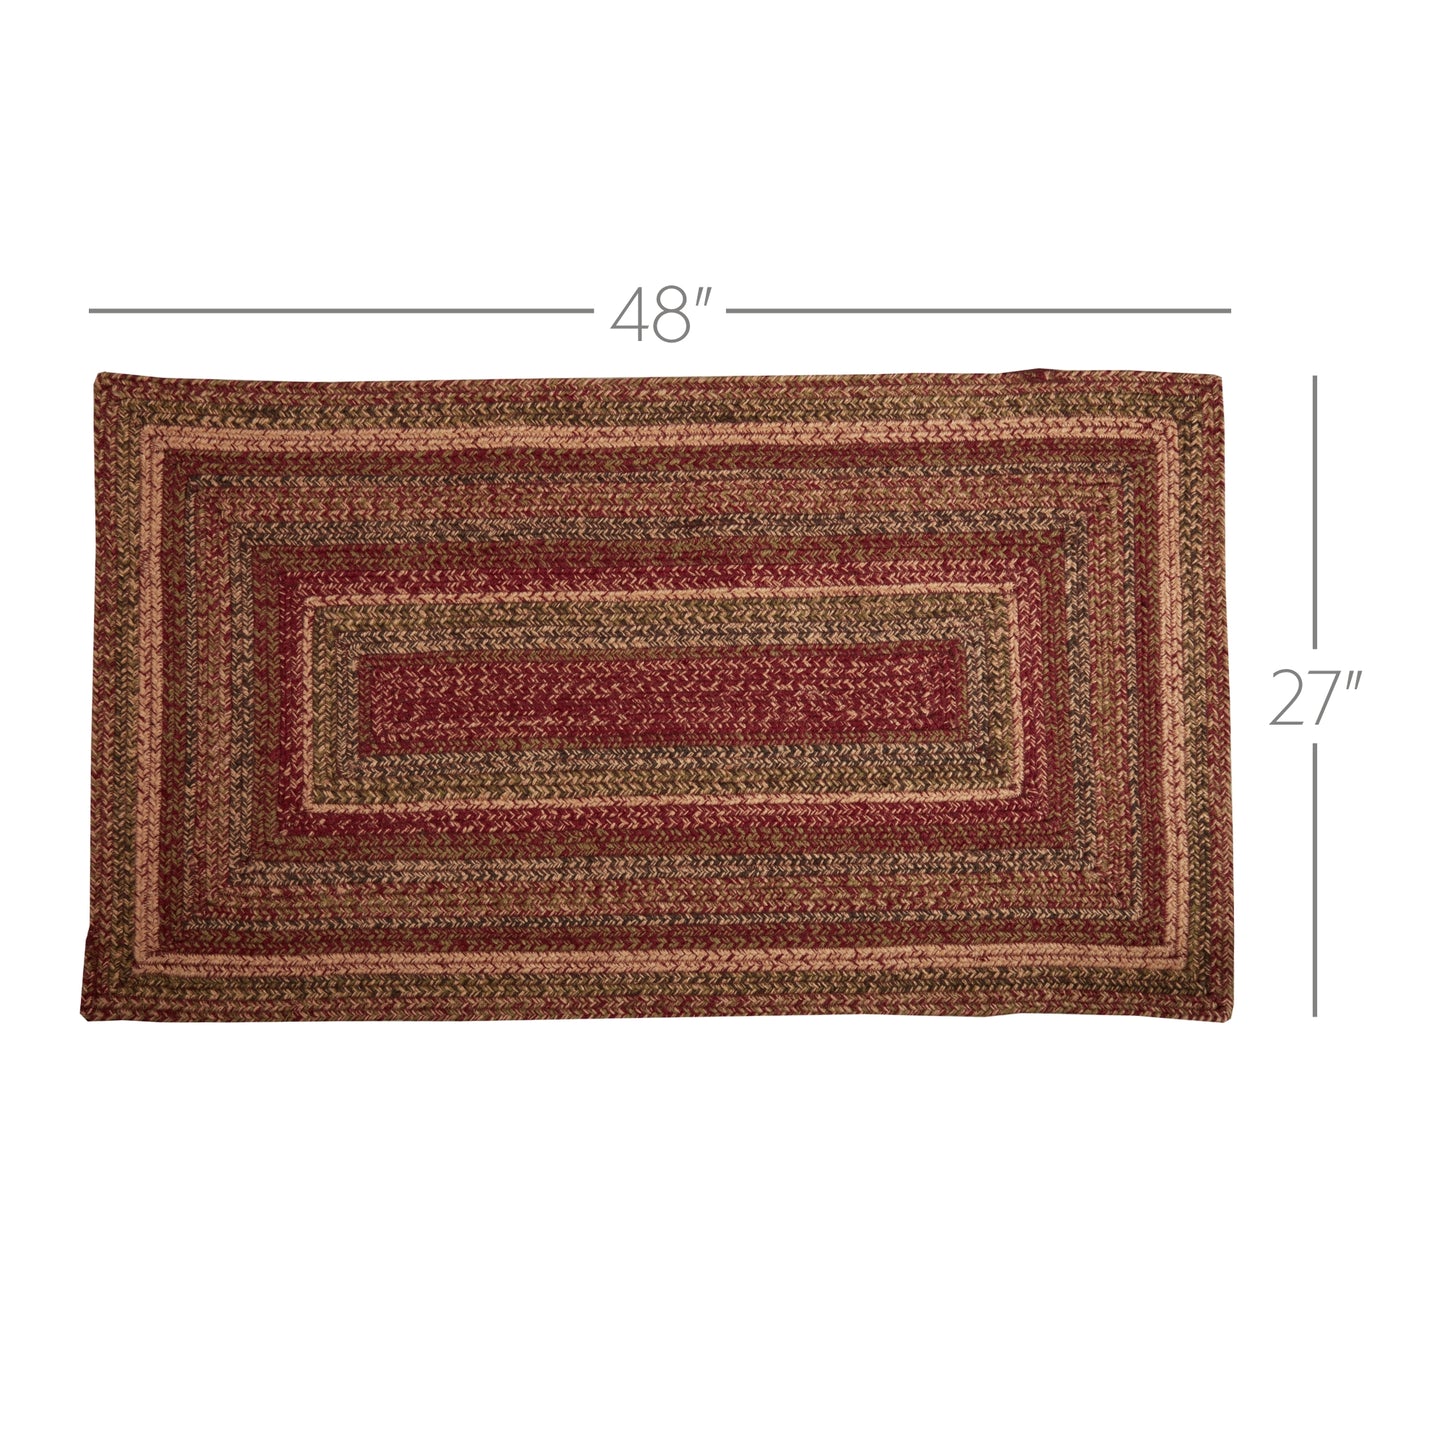 69448-Cider-Mill-Jute-Rug-Rect-w-Pad-27x48-image-2